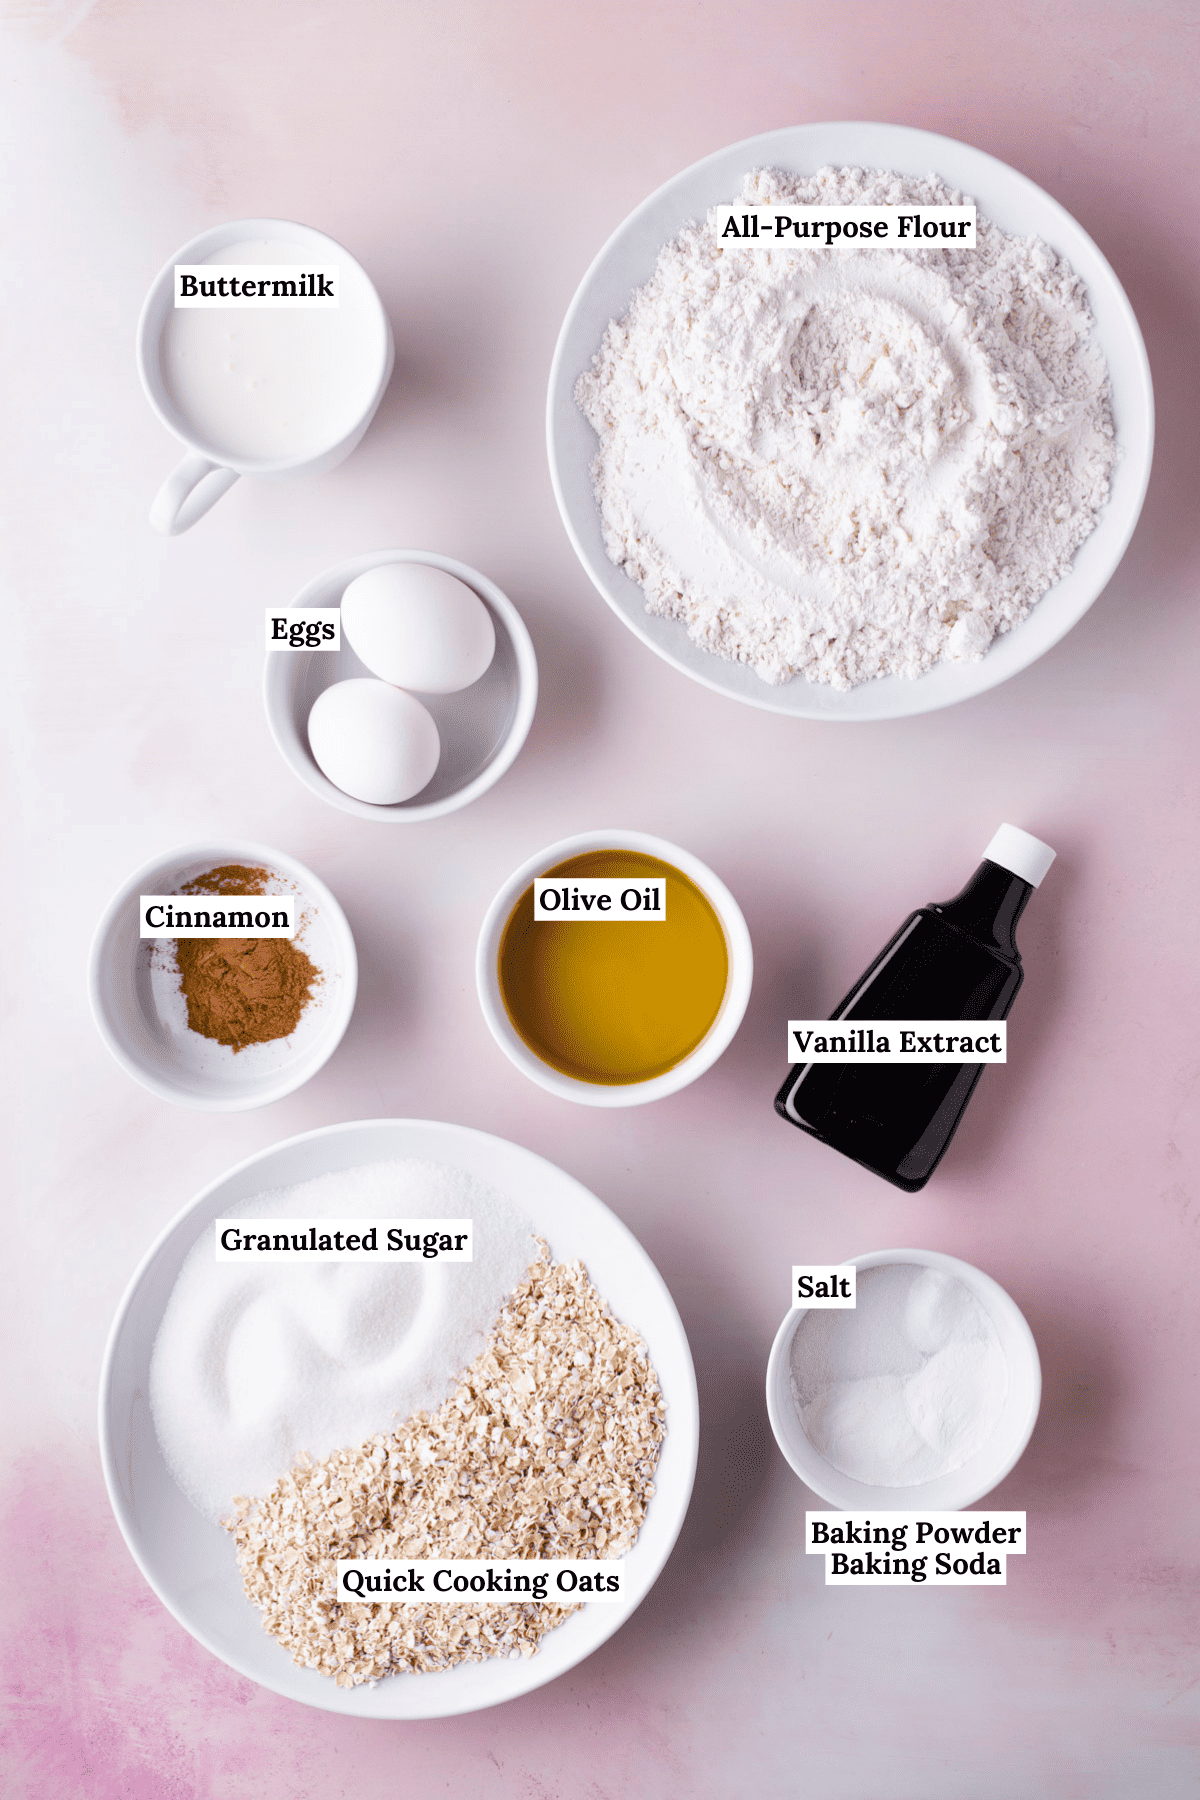 overhead view of the ingredients for oatmeal muffins including buttermilk, all-purpose flour, eggs, cinnamon, olive oil, vanilla extract, granulated sugar, quick cooking oats, salt, baking powder and baking soda